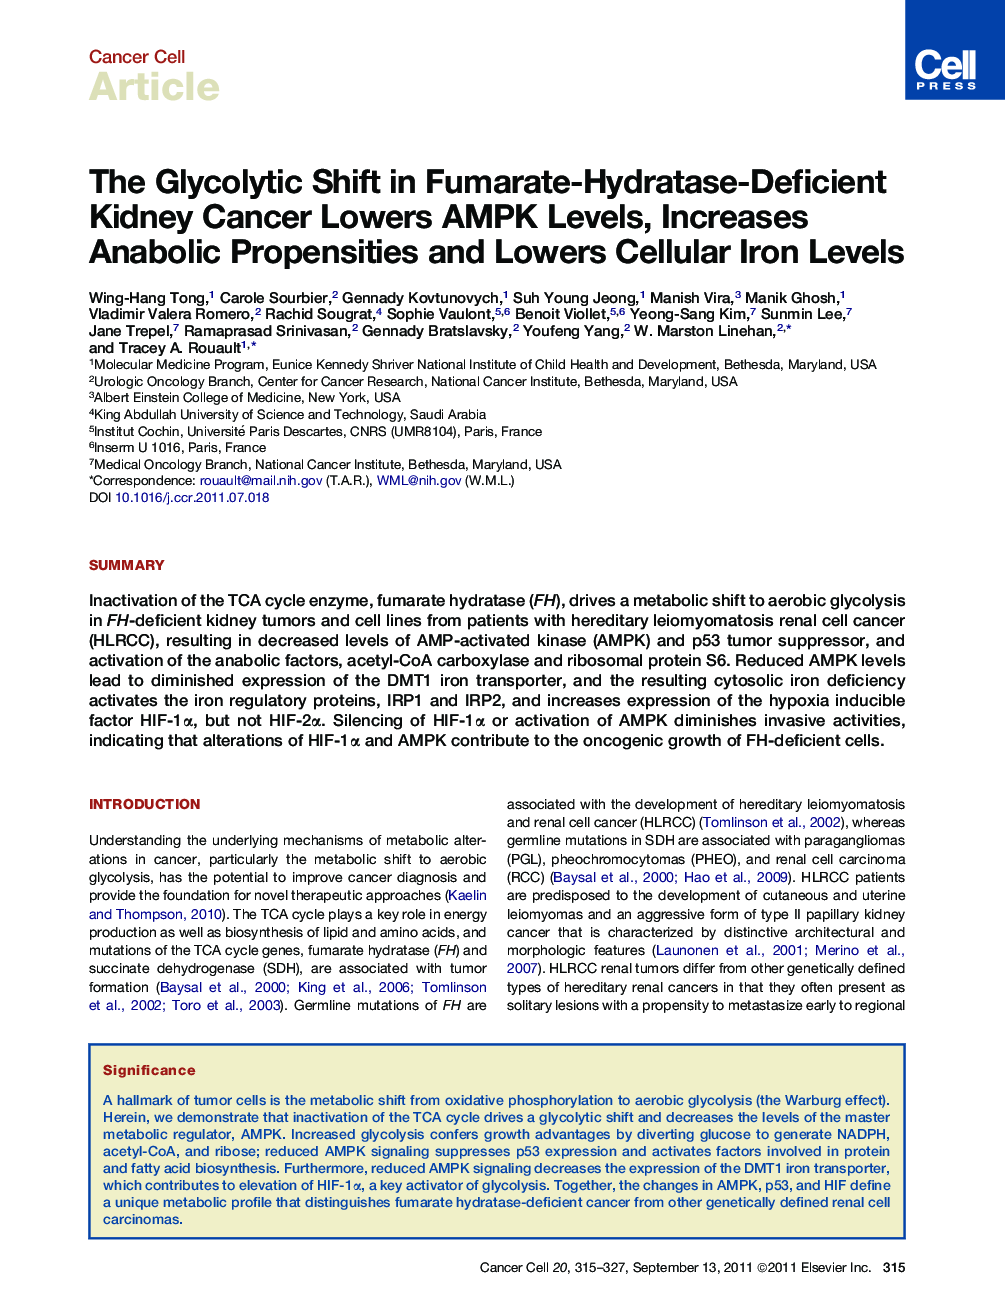 The Glycolytic Shift in Fumarate-Hydratase-Deficient Kidney Cancer Lowers AMPK Levels, Increases Anabolic Propensities and Lowers Cellular Iron Levels